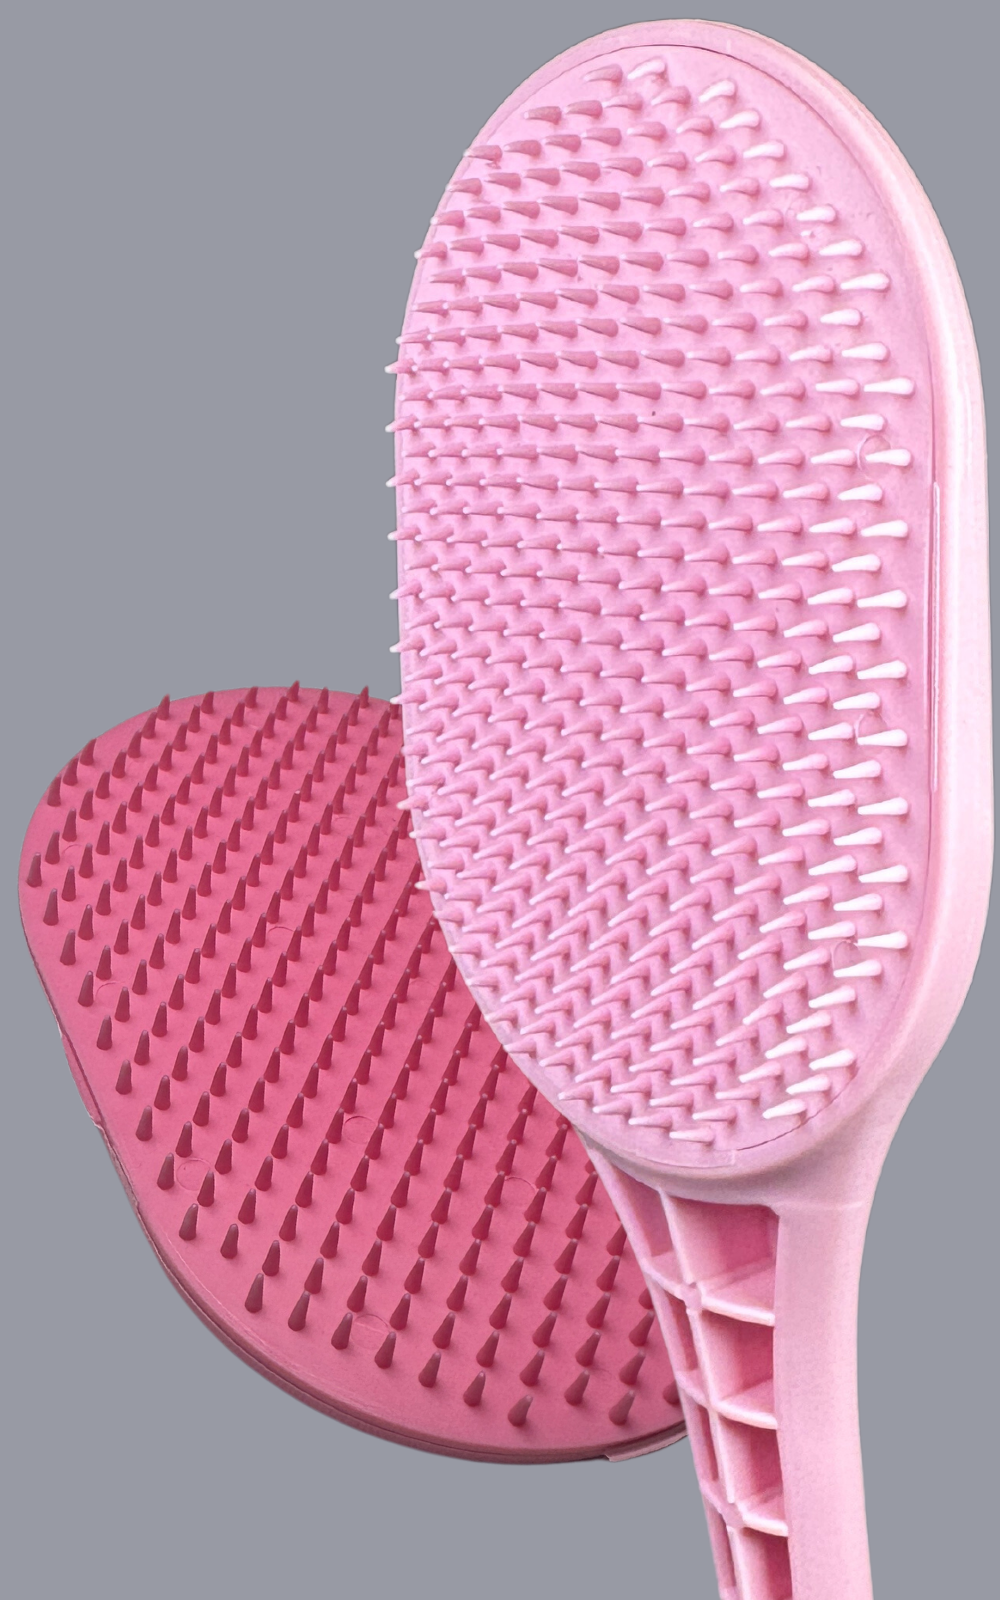 The Pink Body Scratcher